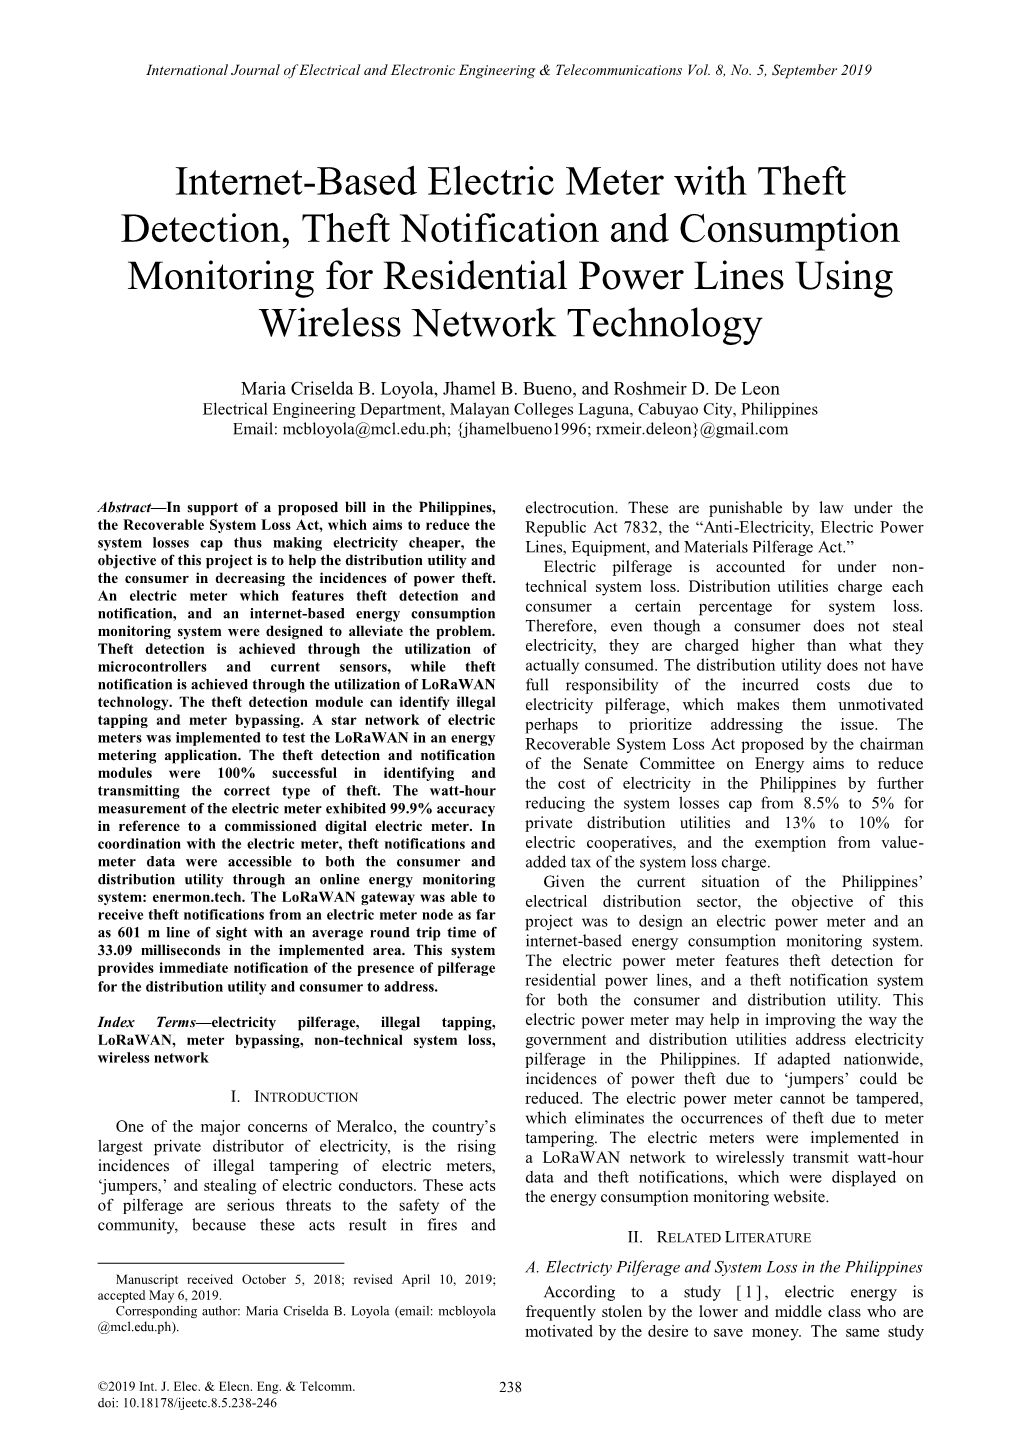 Internet-Based Electric Meter with Theft Detection, Theft Notification and Consumption Monitoring for Residential Power Lines Using Wireless Network Technology